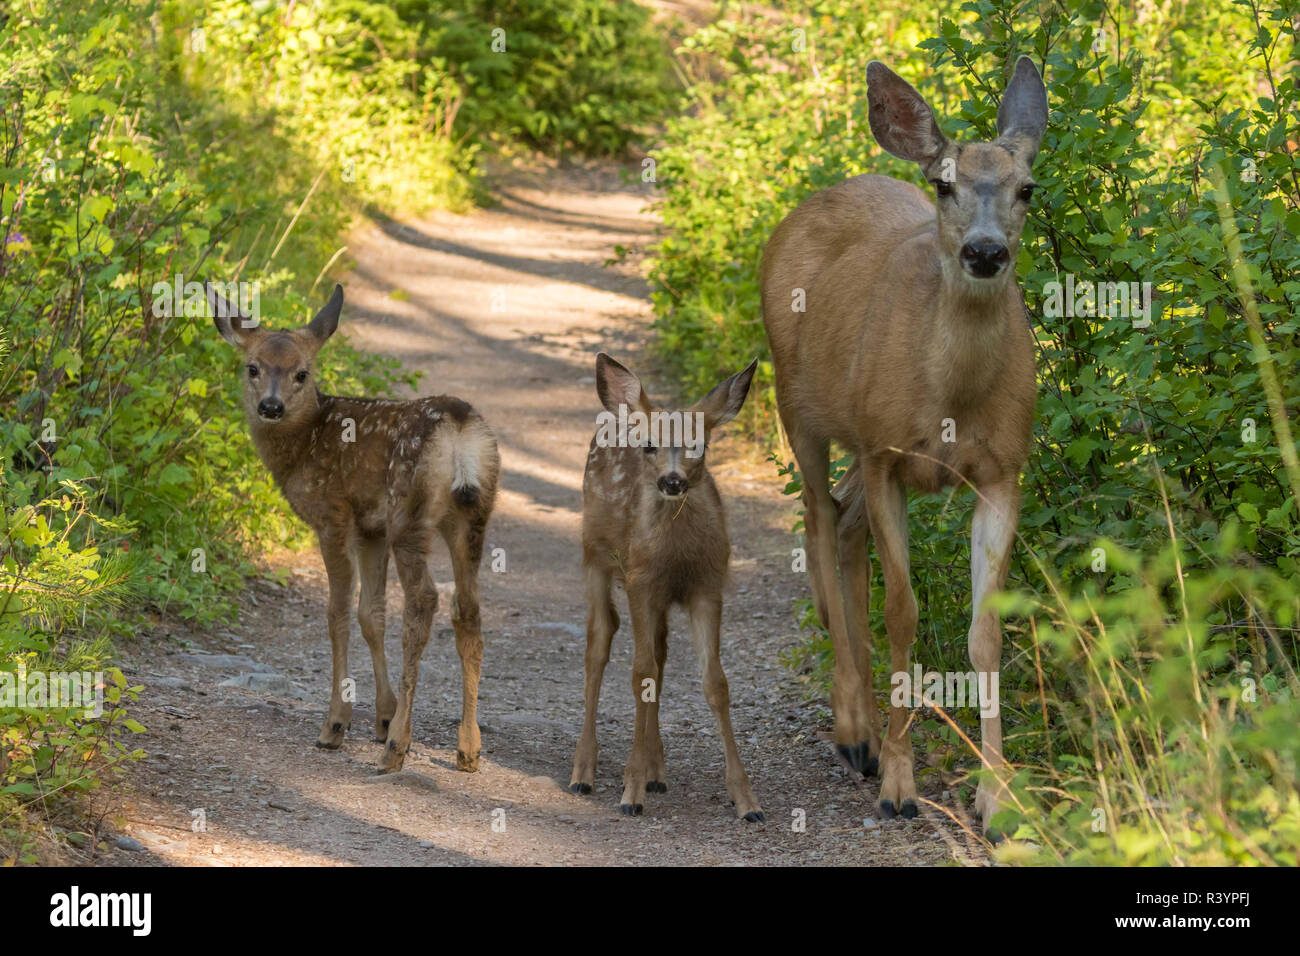 USA, Montana, Glacier National Park. Mule deer fawns and mother on dirt road. Stock Photo